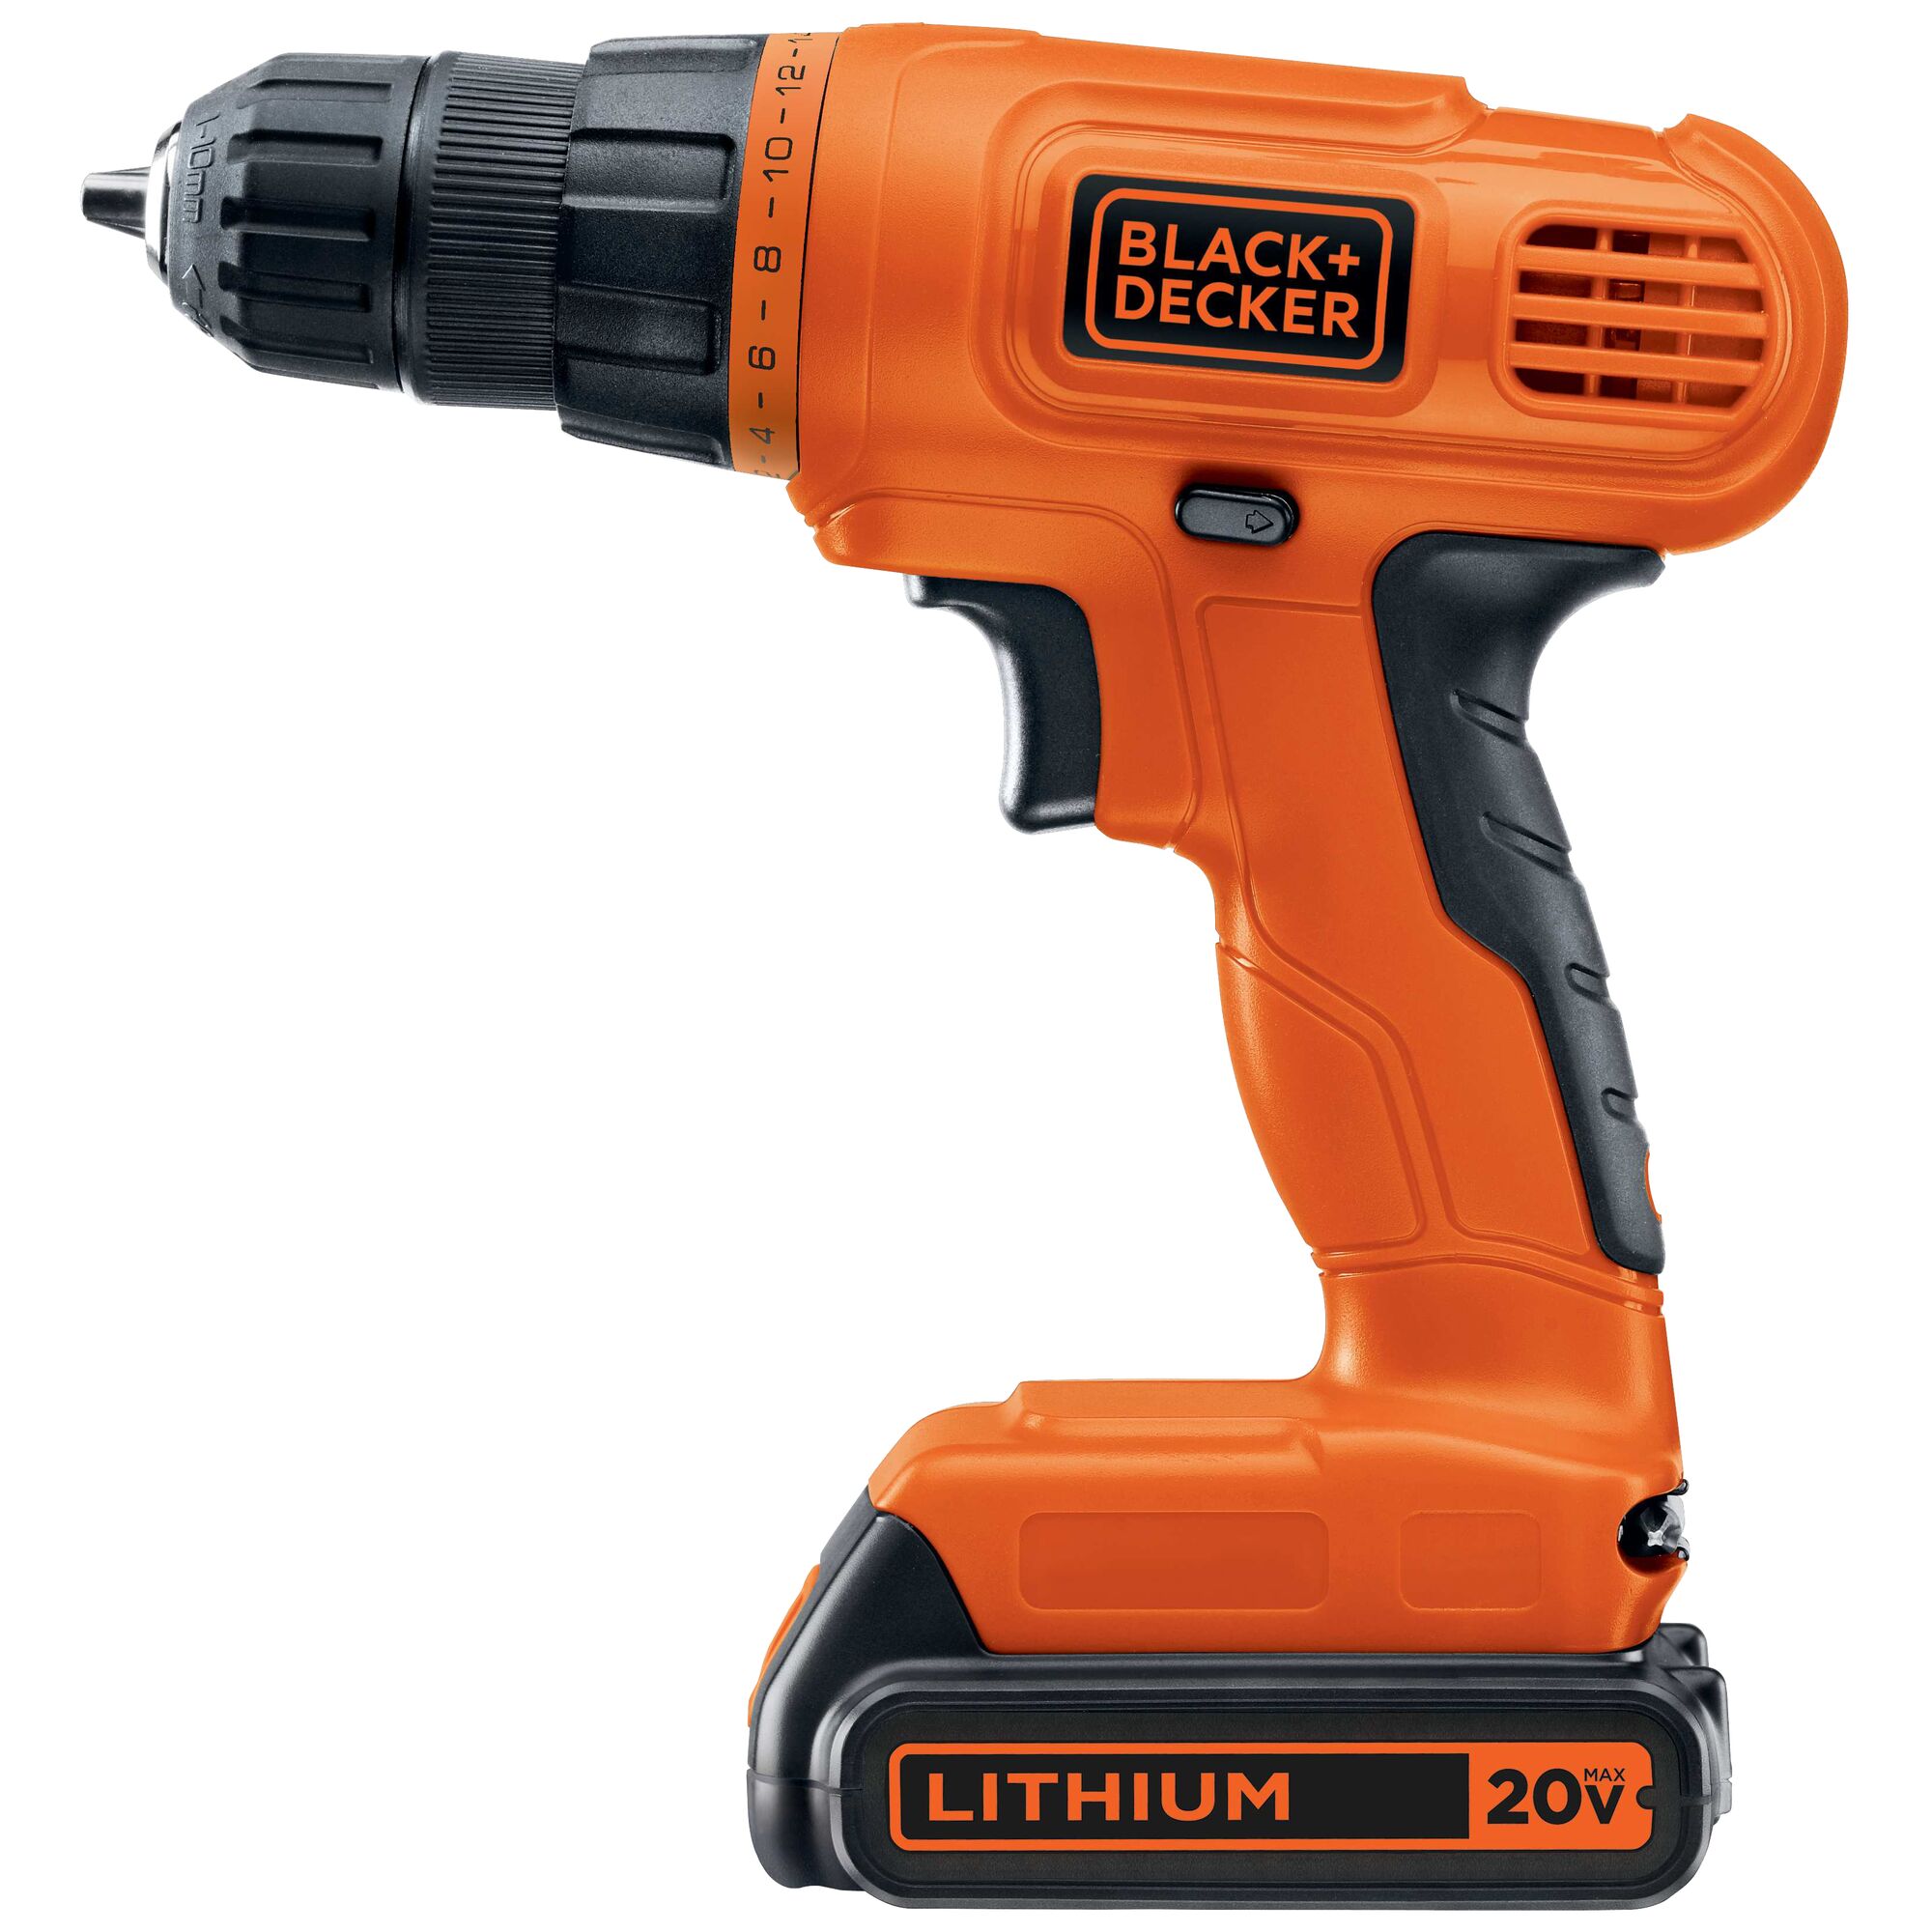 Side profile of 20 volt MAX lithium drill driver.